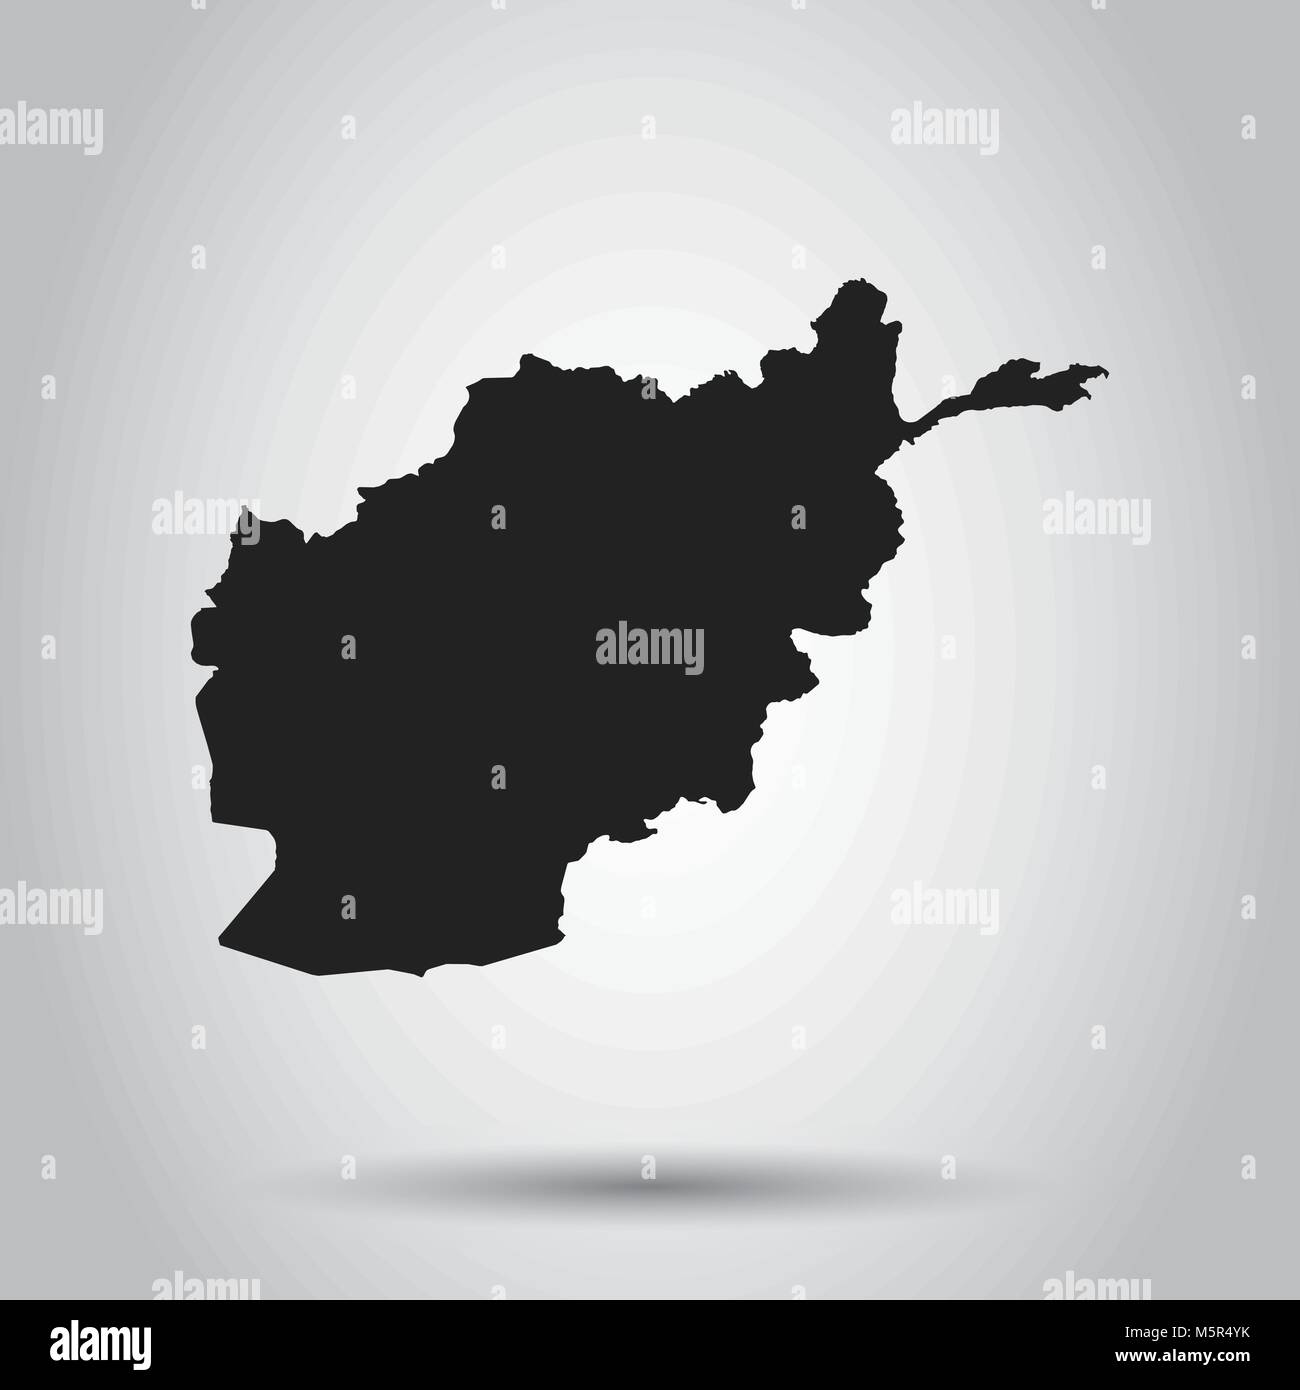 Afghanistan vector map. Black icon on white background. Stock Vector